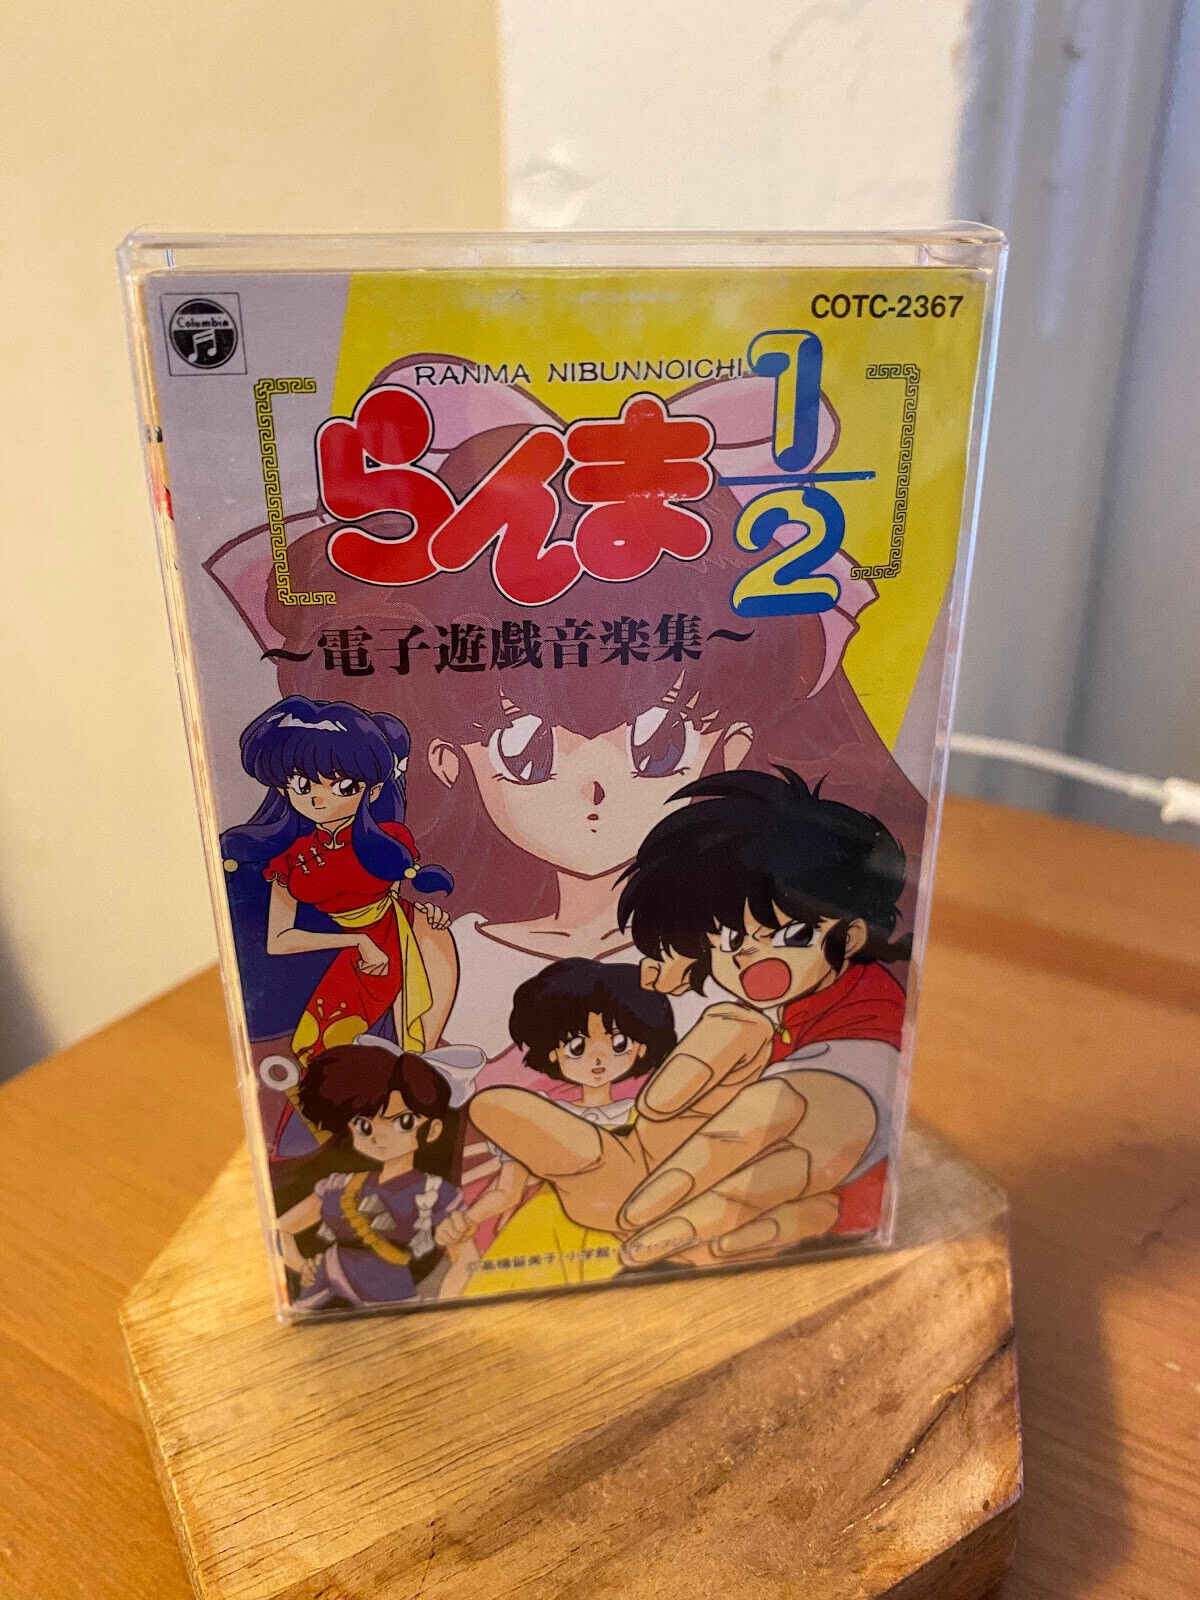 Ranma 1/2 - Electronic Game Music Collection - Music Cassette